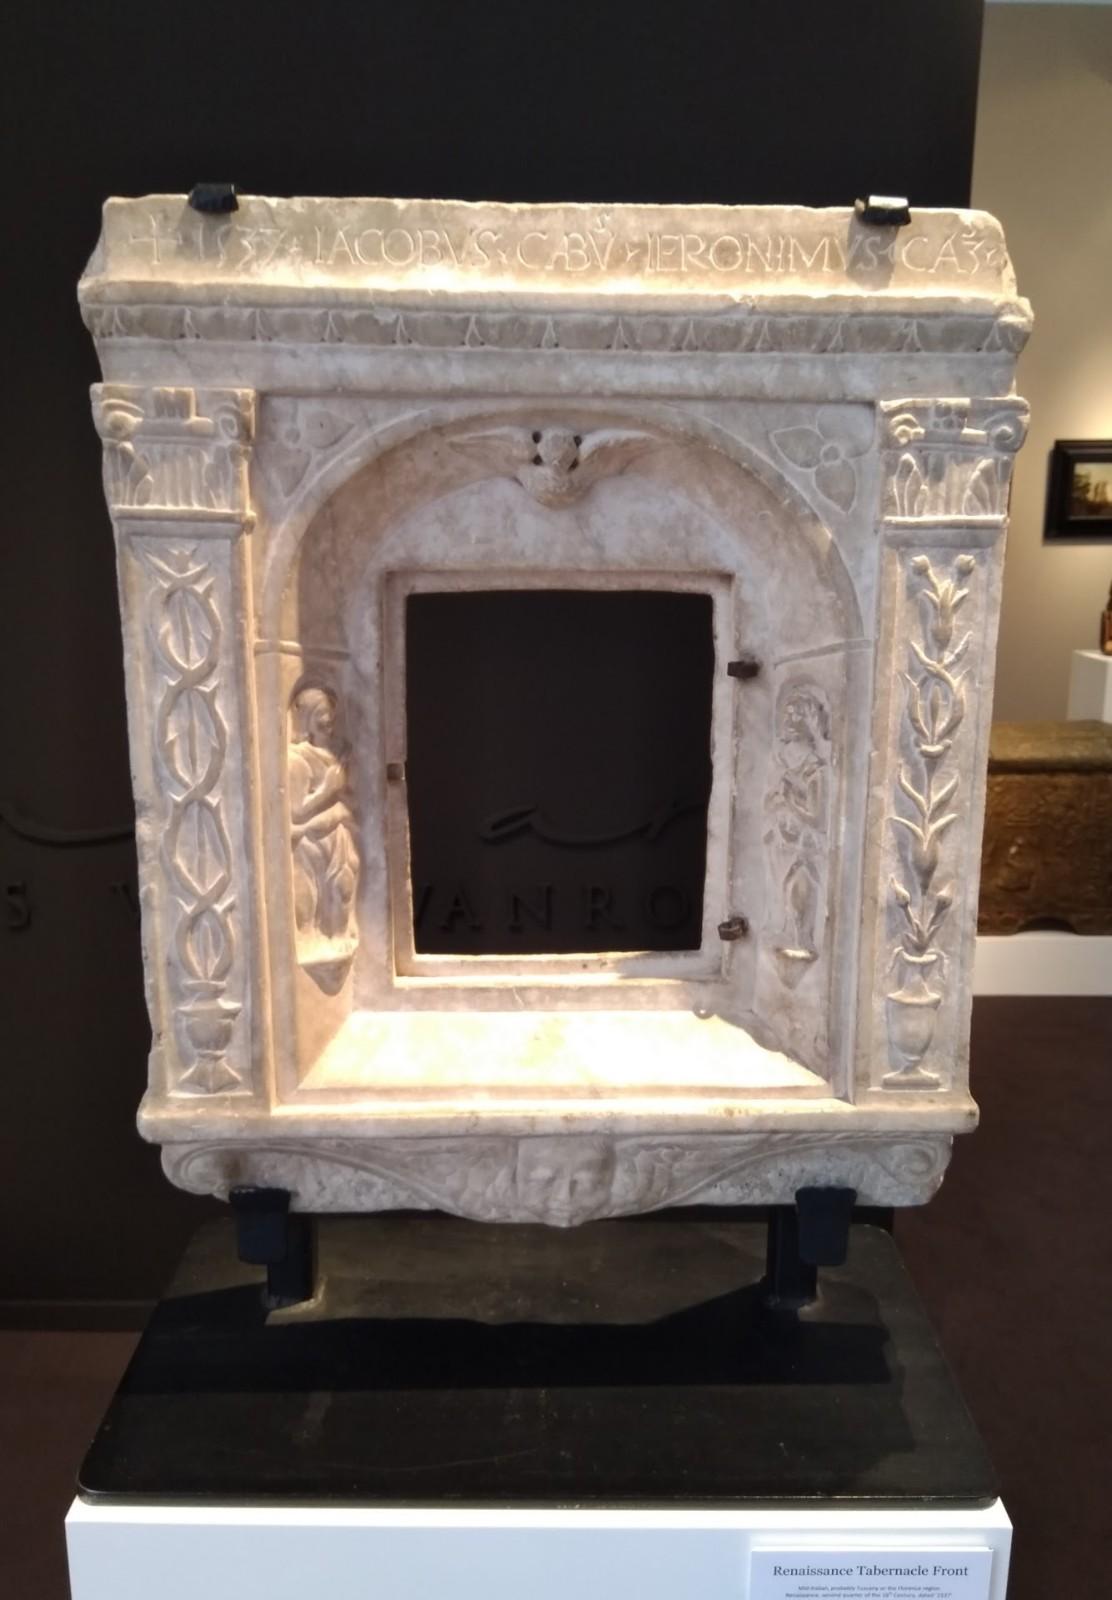 Italy, probably Tuscany or the Florence region
Renaissance, second quarter of the 16th Century, dated '1537'

Inscribed and dated '+ 1537 . IACOBVS . CABVS . IERONIMVS . CAZS', on the top
Marble, on a later black metal stand
H. 56 cm. W. 48 cm.